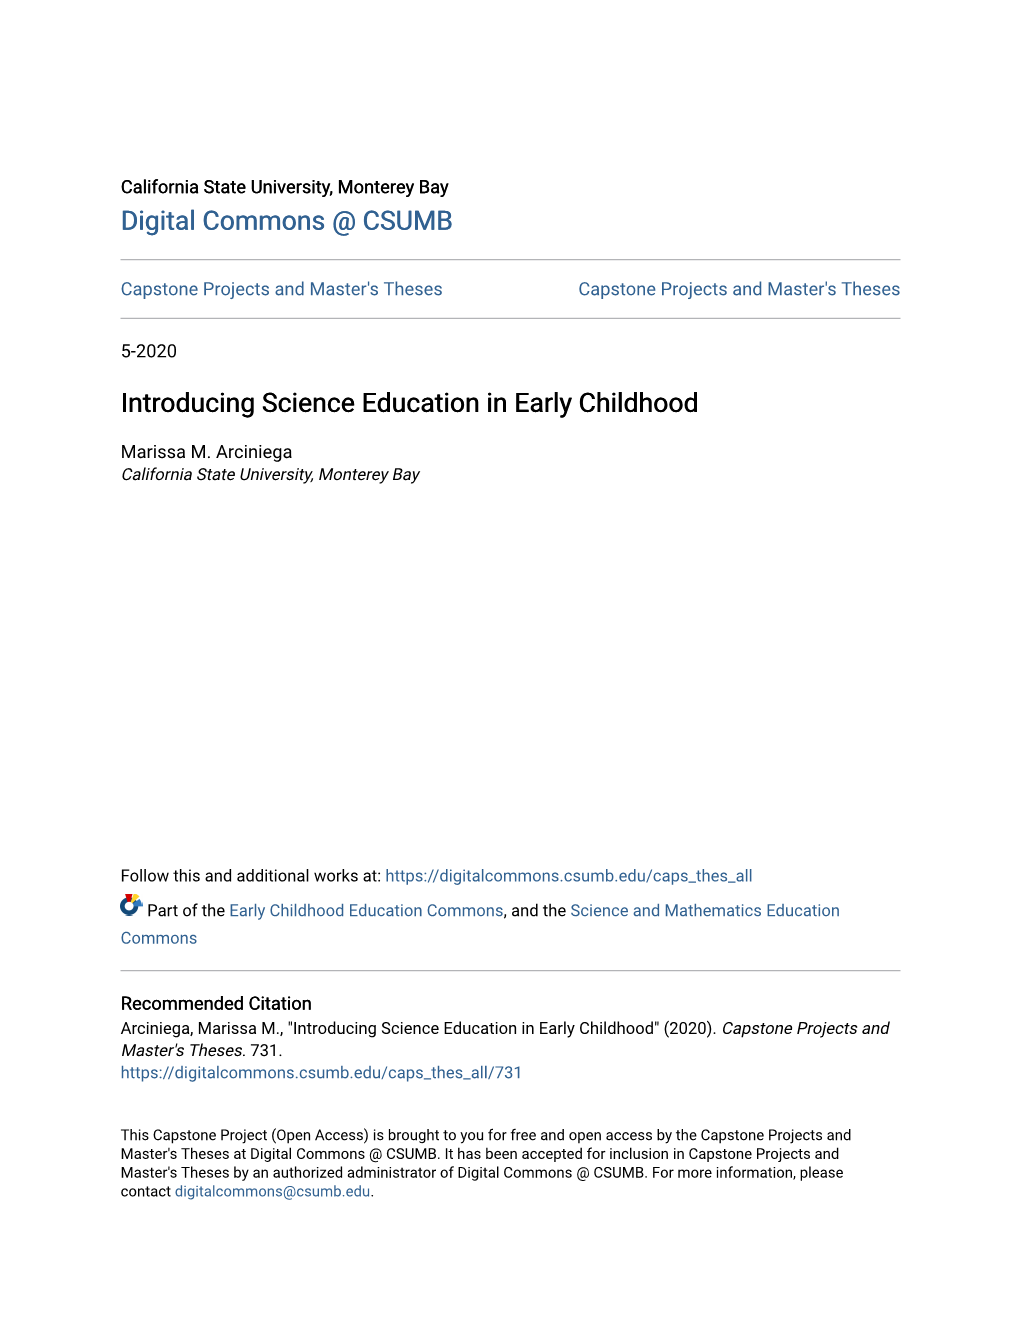 Introducing Science Education in Early Childhood